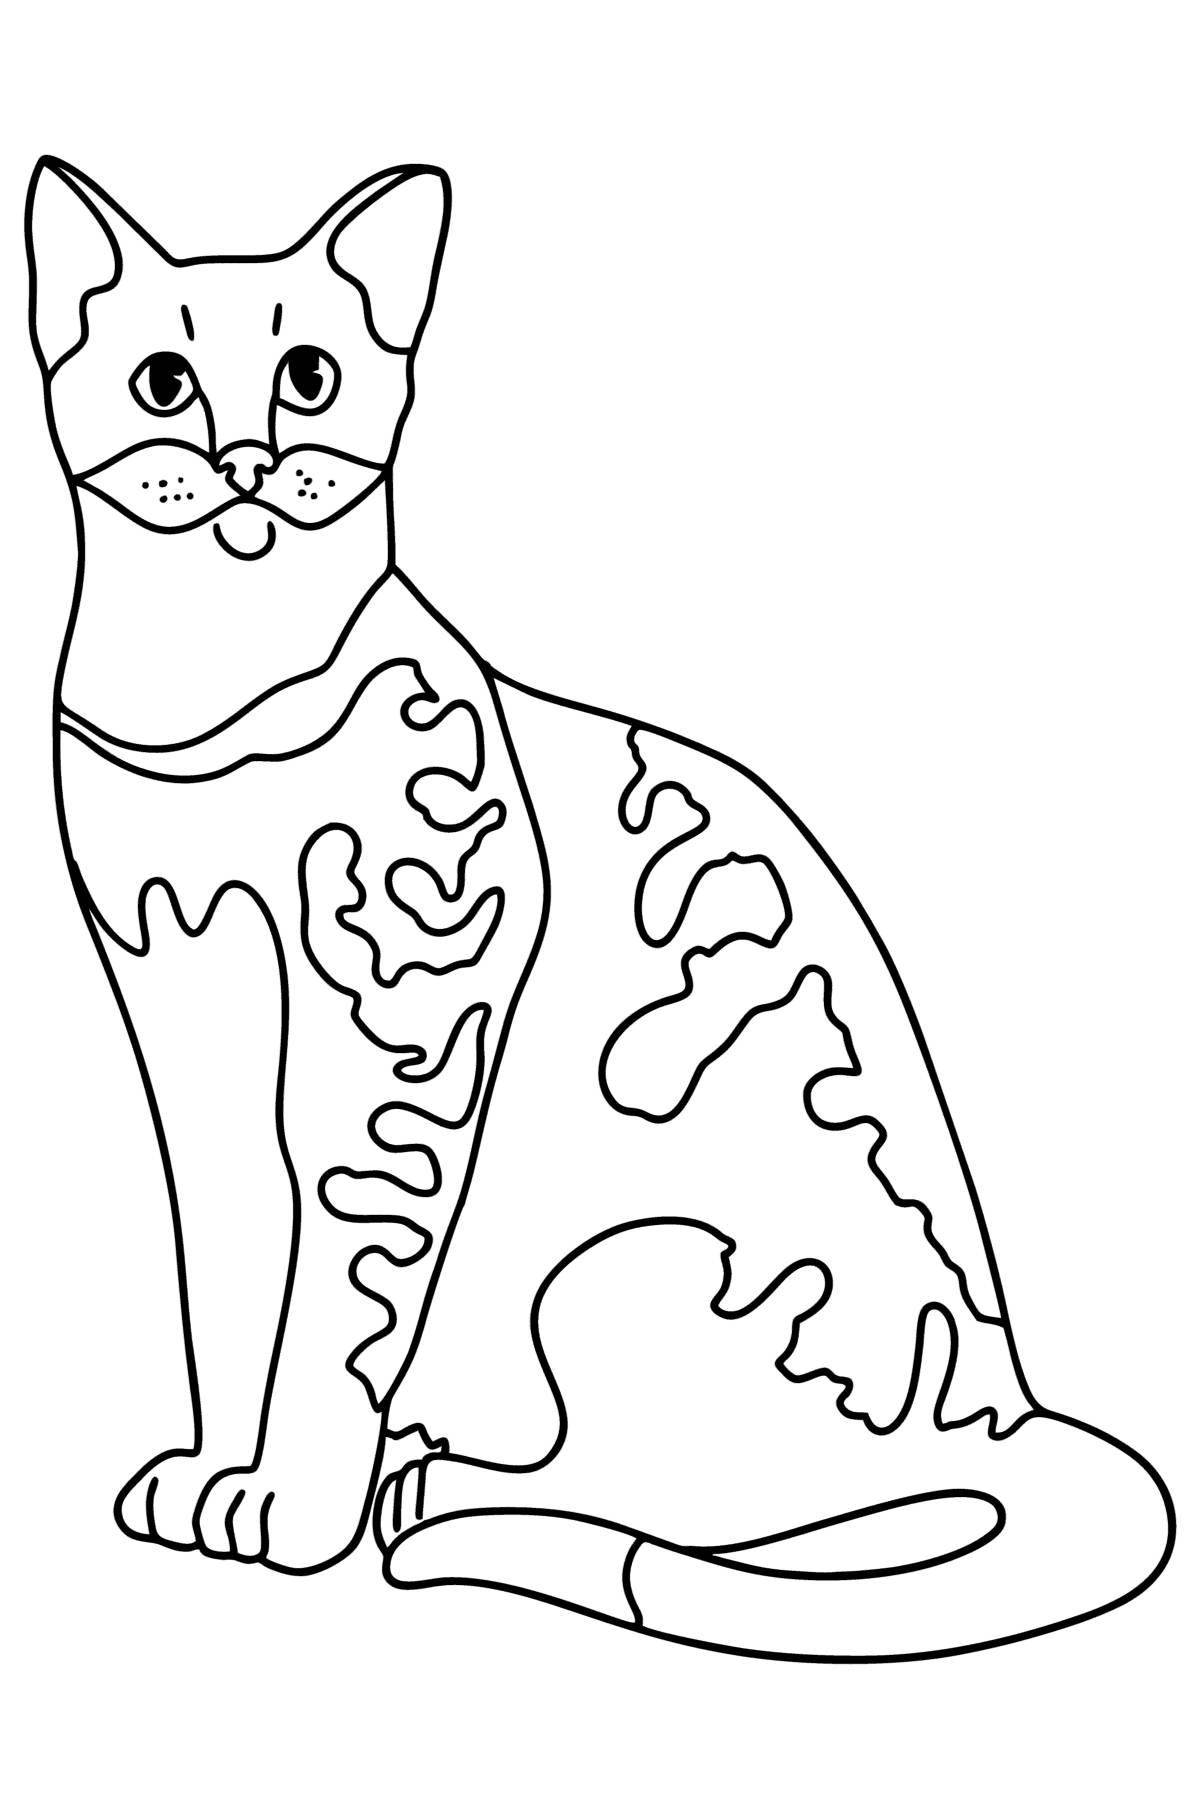 Adorable Egyptian cat coloring book